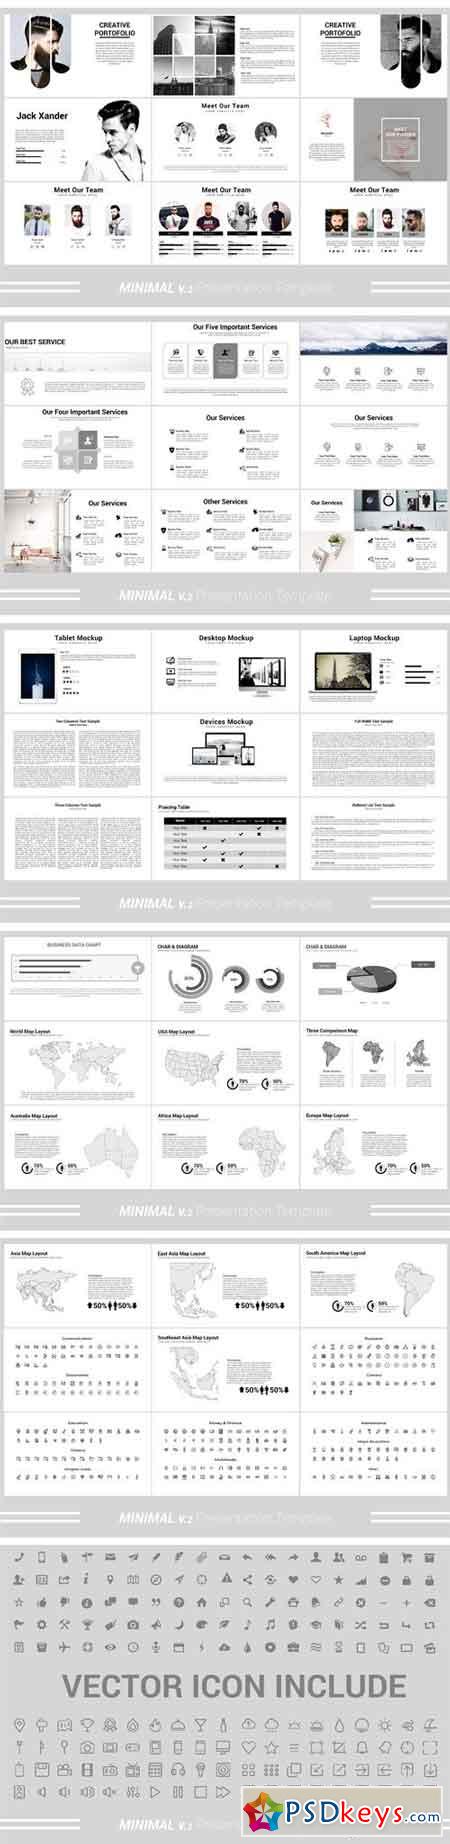 Minimal v.2 Powerpoint Template 1408610